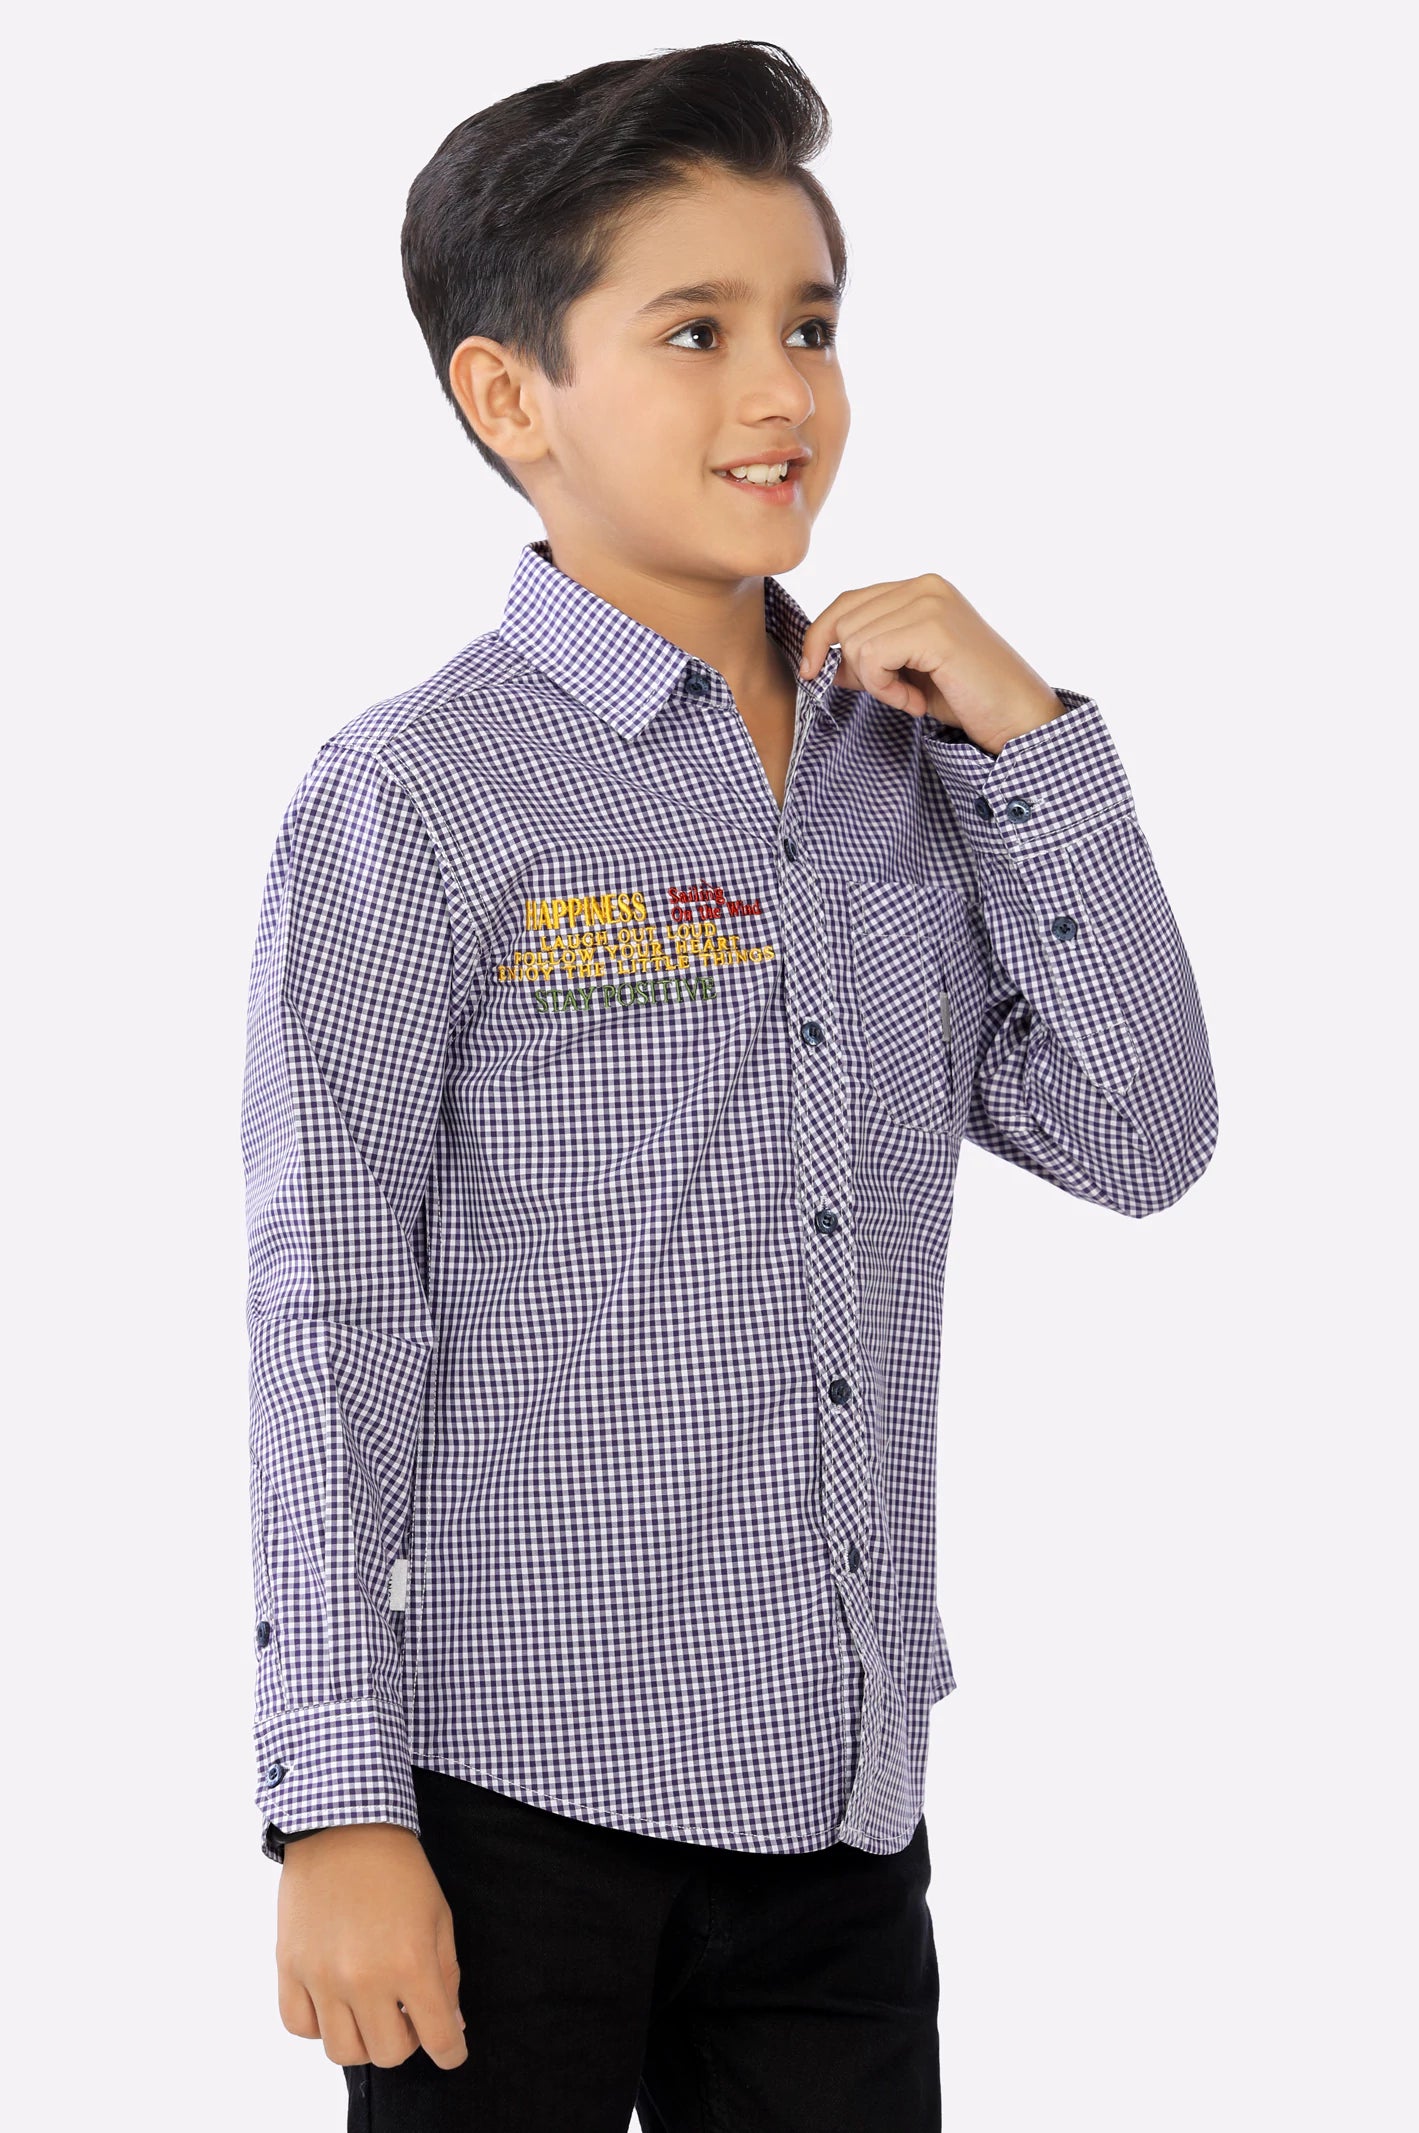 Dark Purple Gingham Check Boys Shirt From Diners